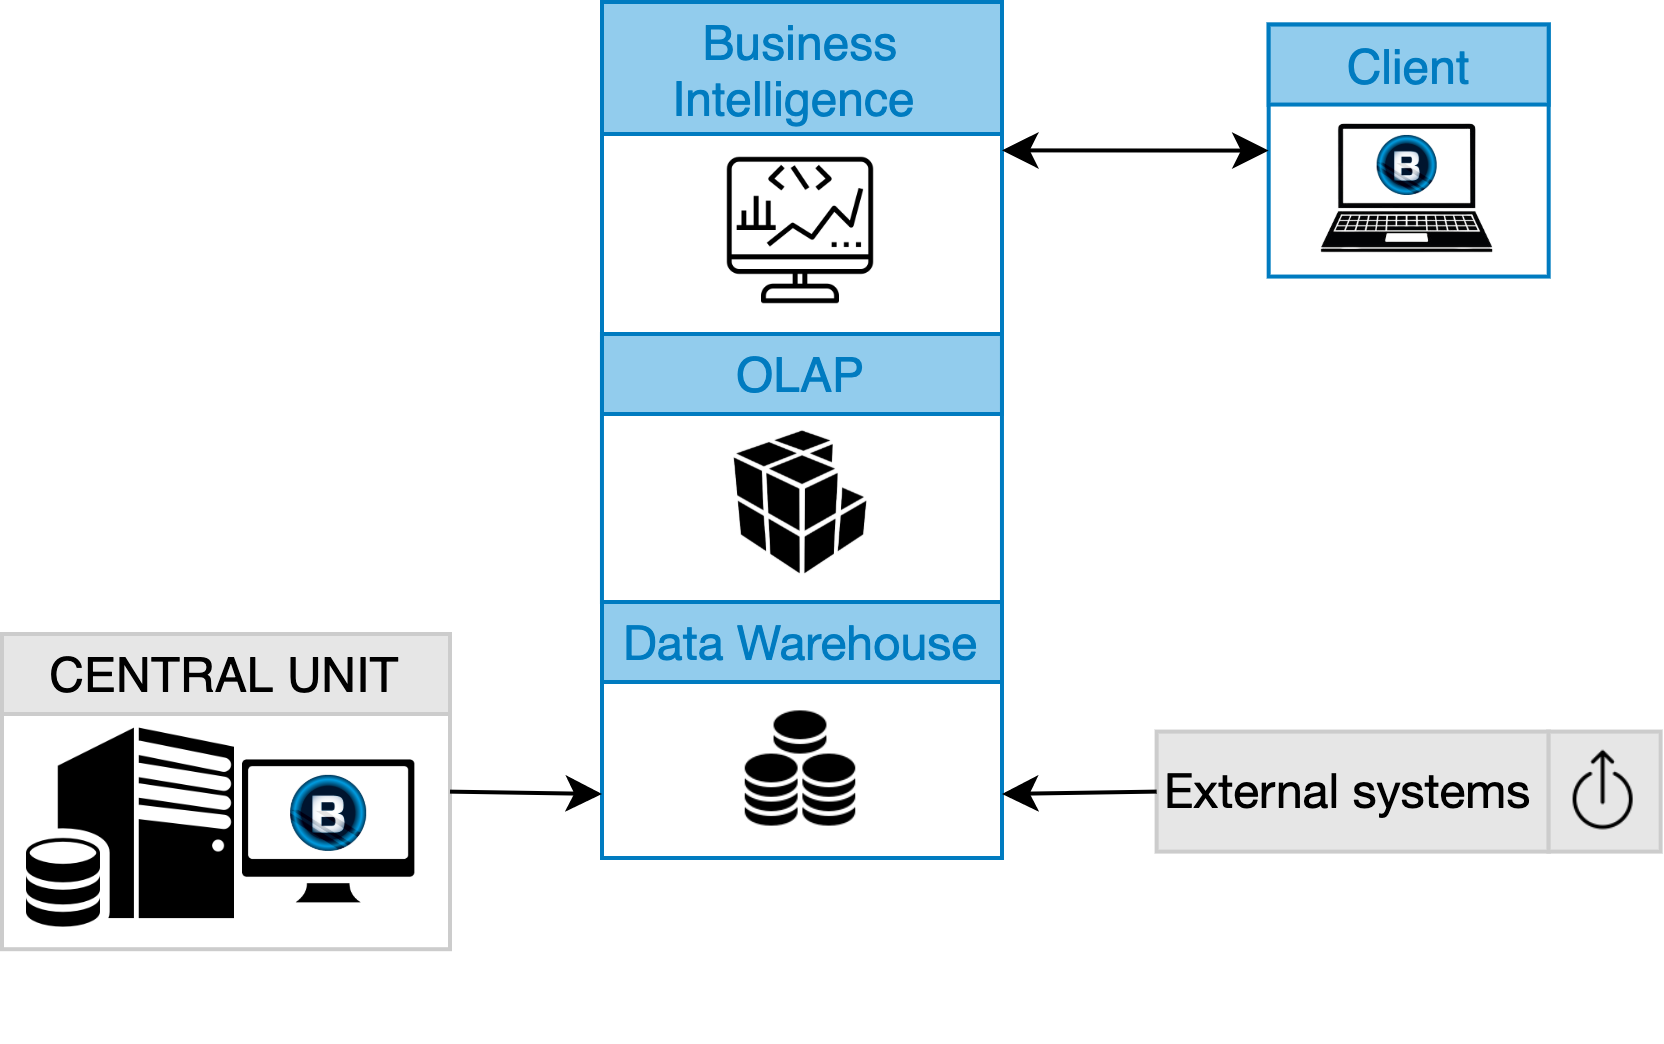 Architecture schema showing the Data Warehouse System and Business Intelligence